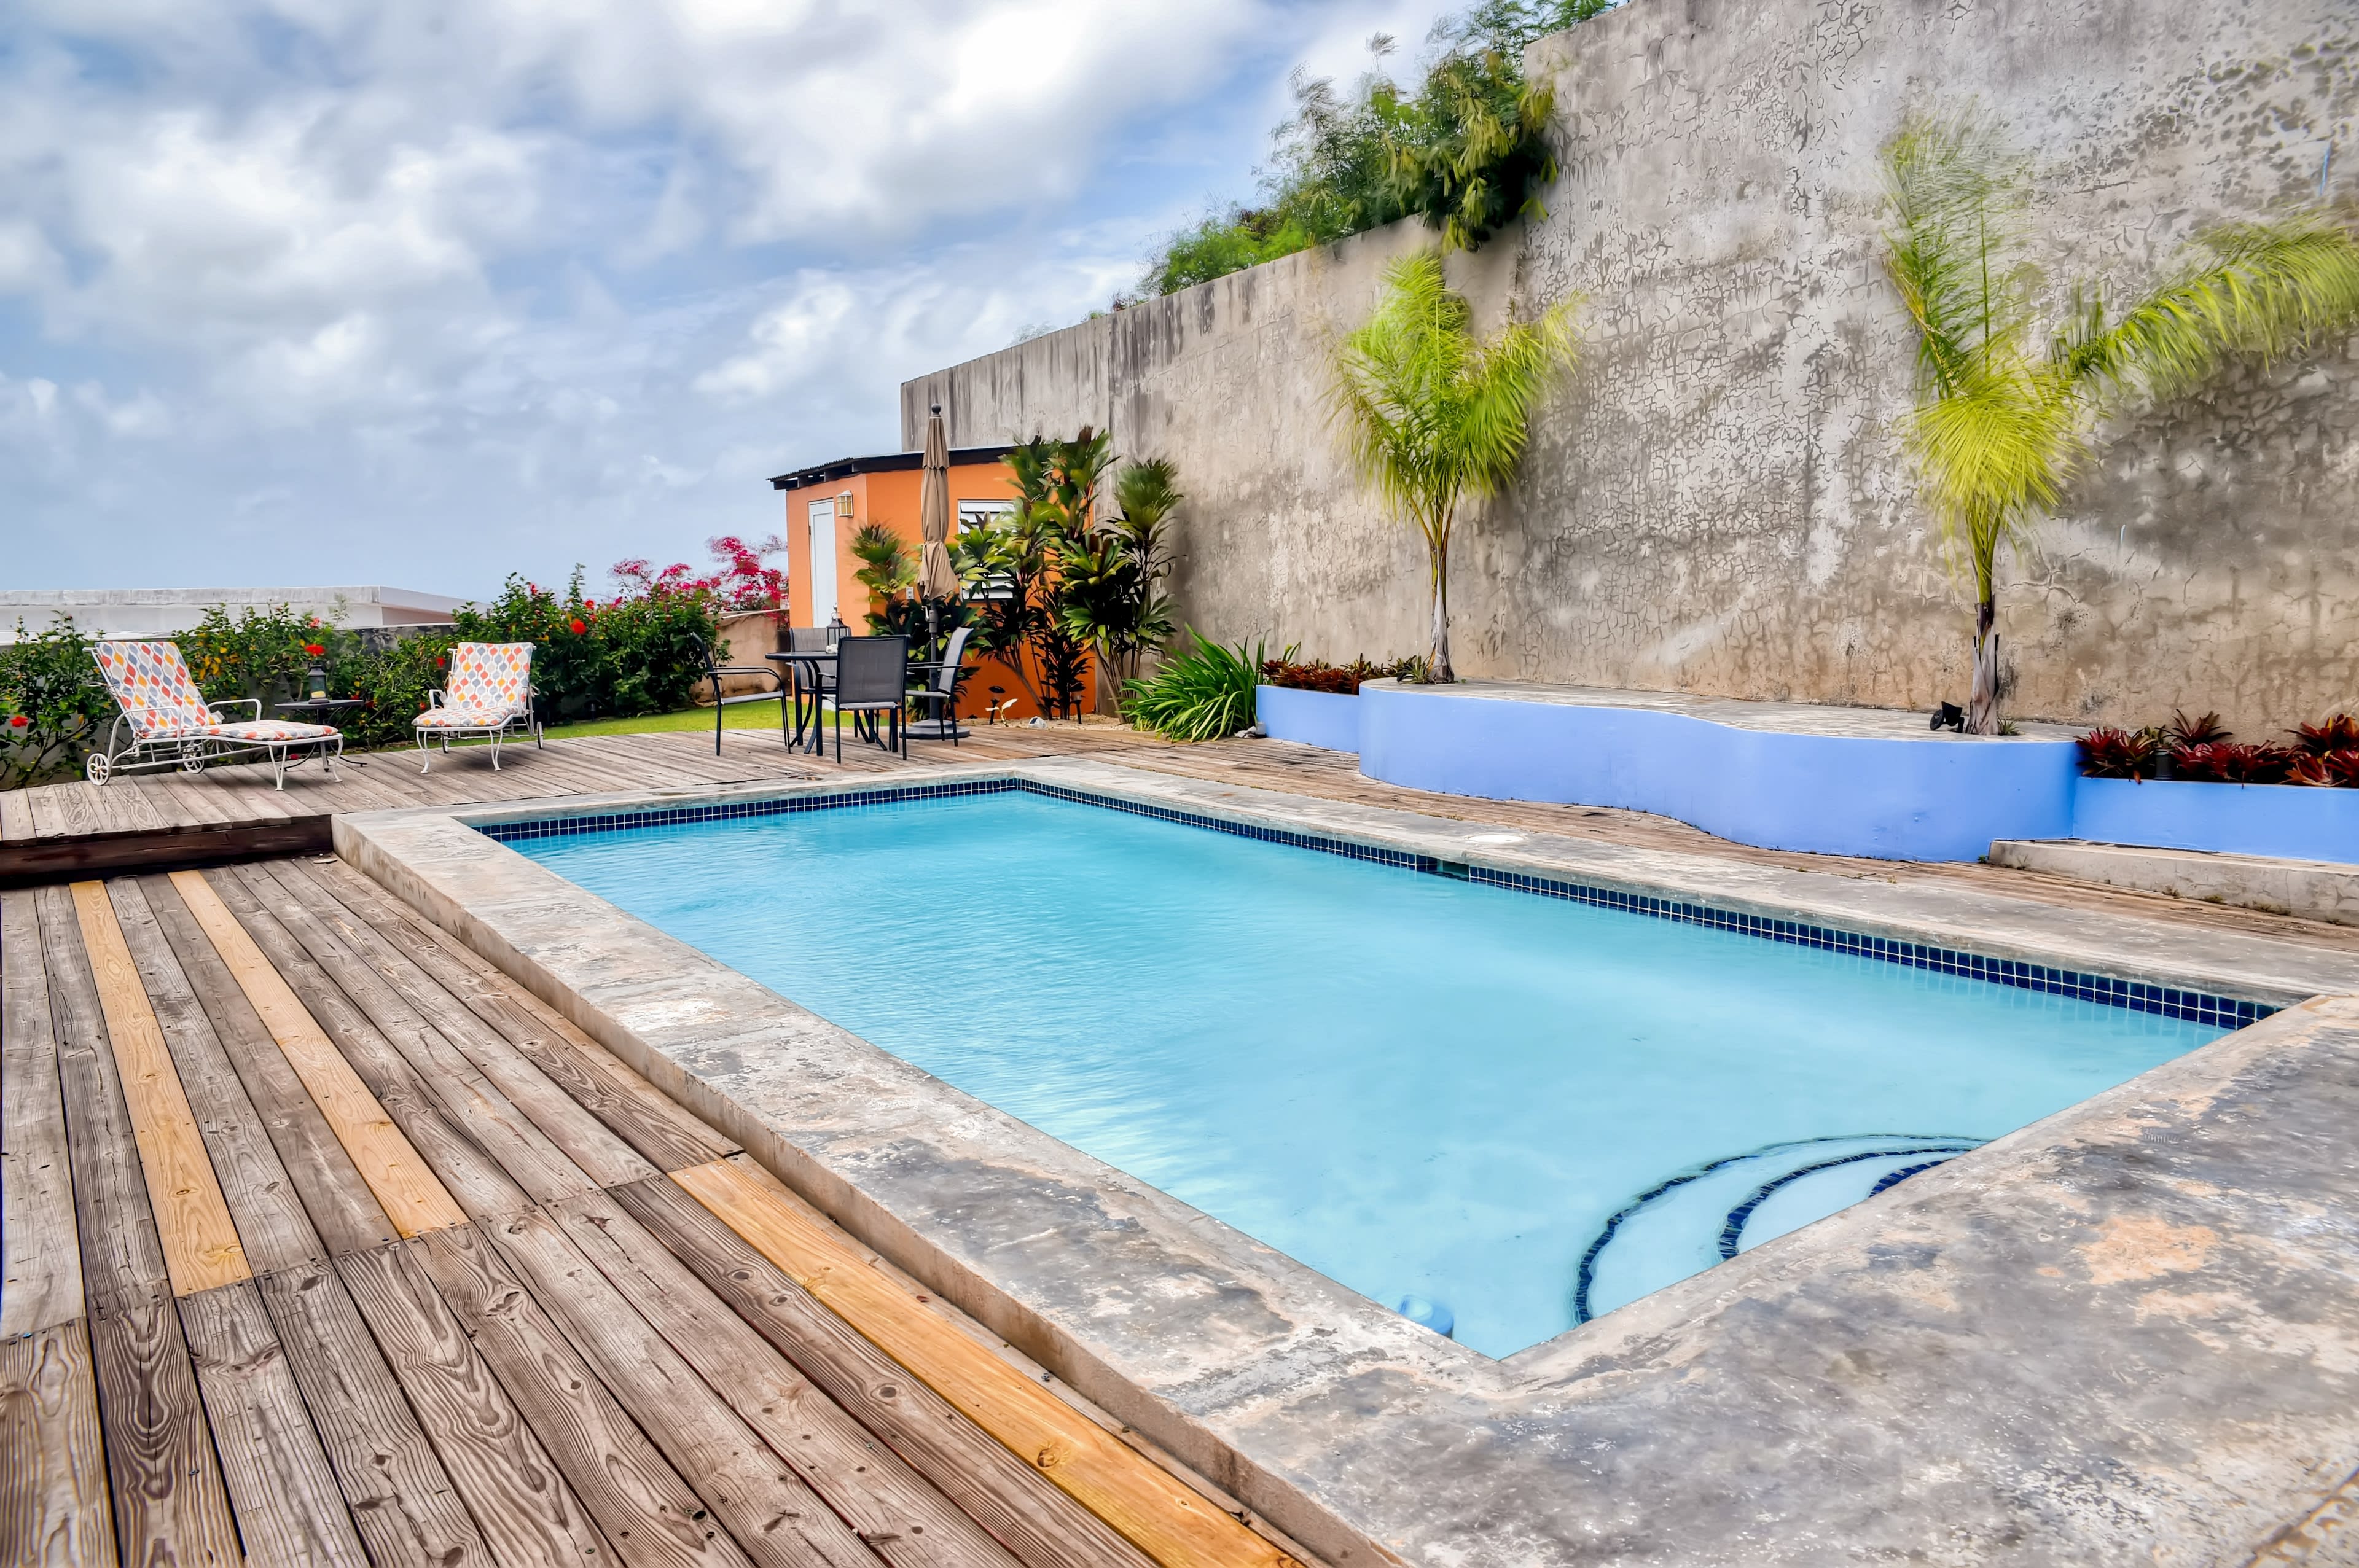 Vieques Island Vacation Rental | 1BR | 1BA | 1,100 Sq Ft | 1 Step for Access